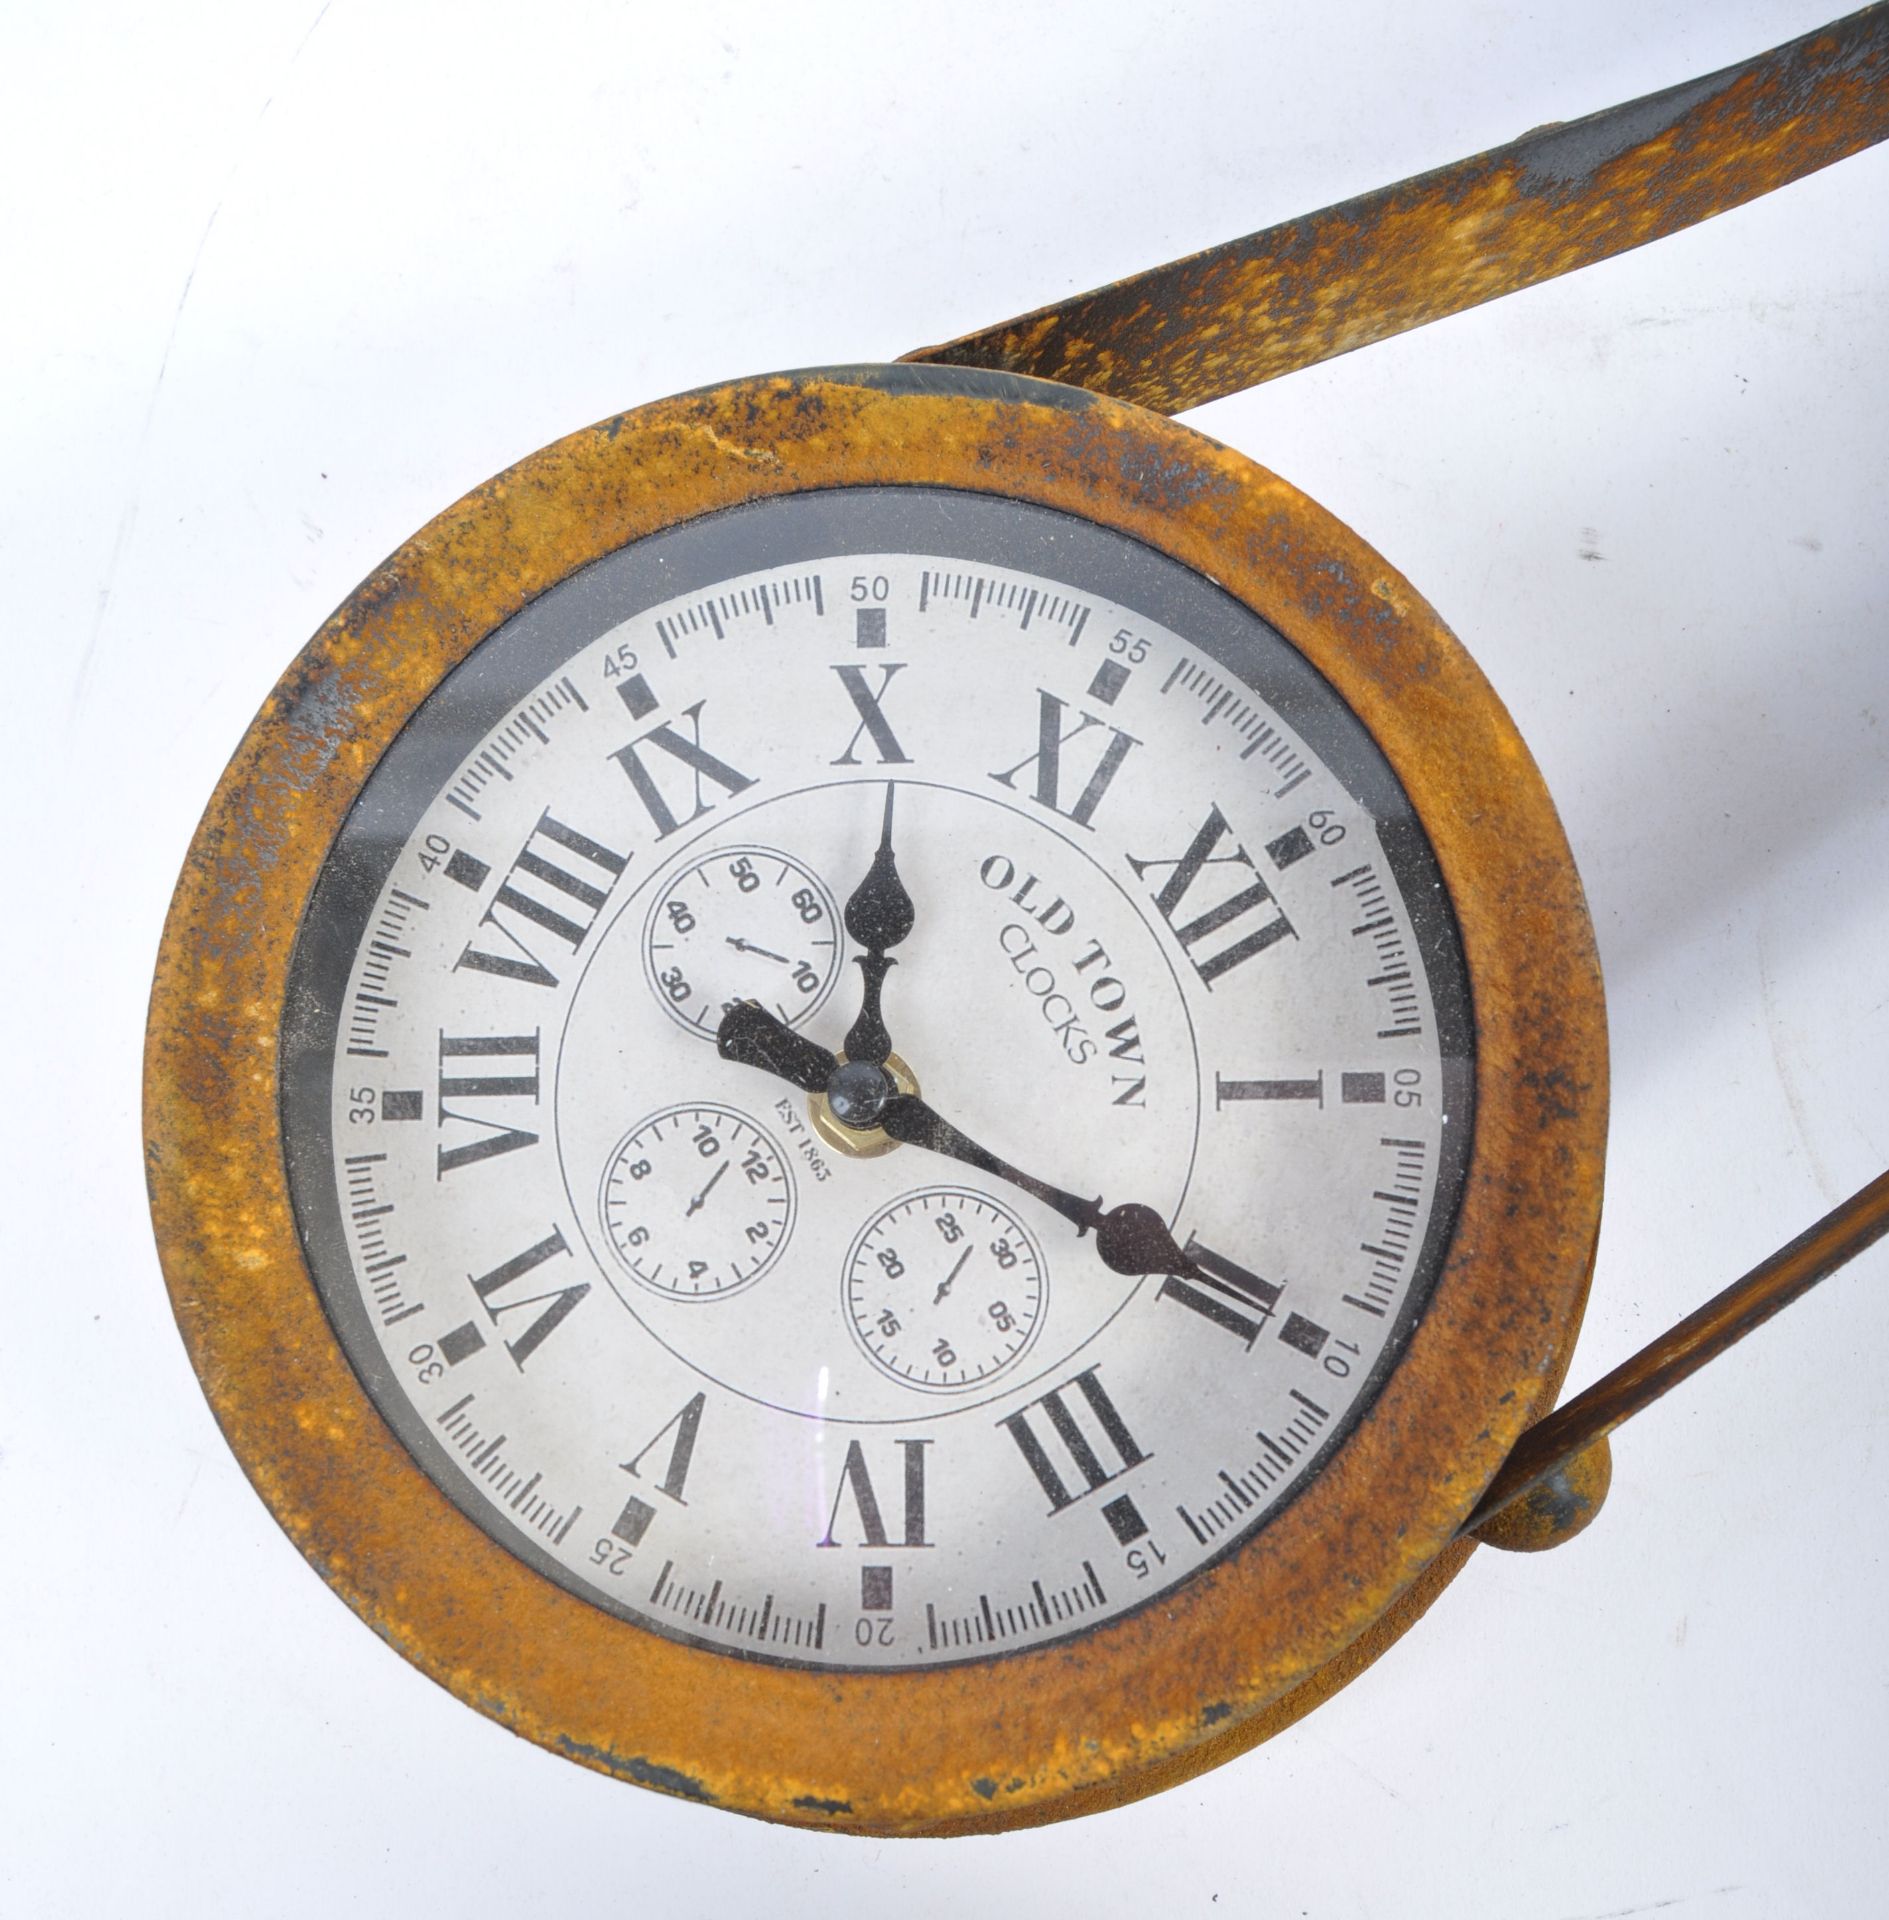 20TH CENTURY PROP STEAMPUNK STYLE WALL CLOCK - Image 2 of 6